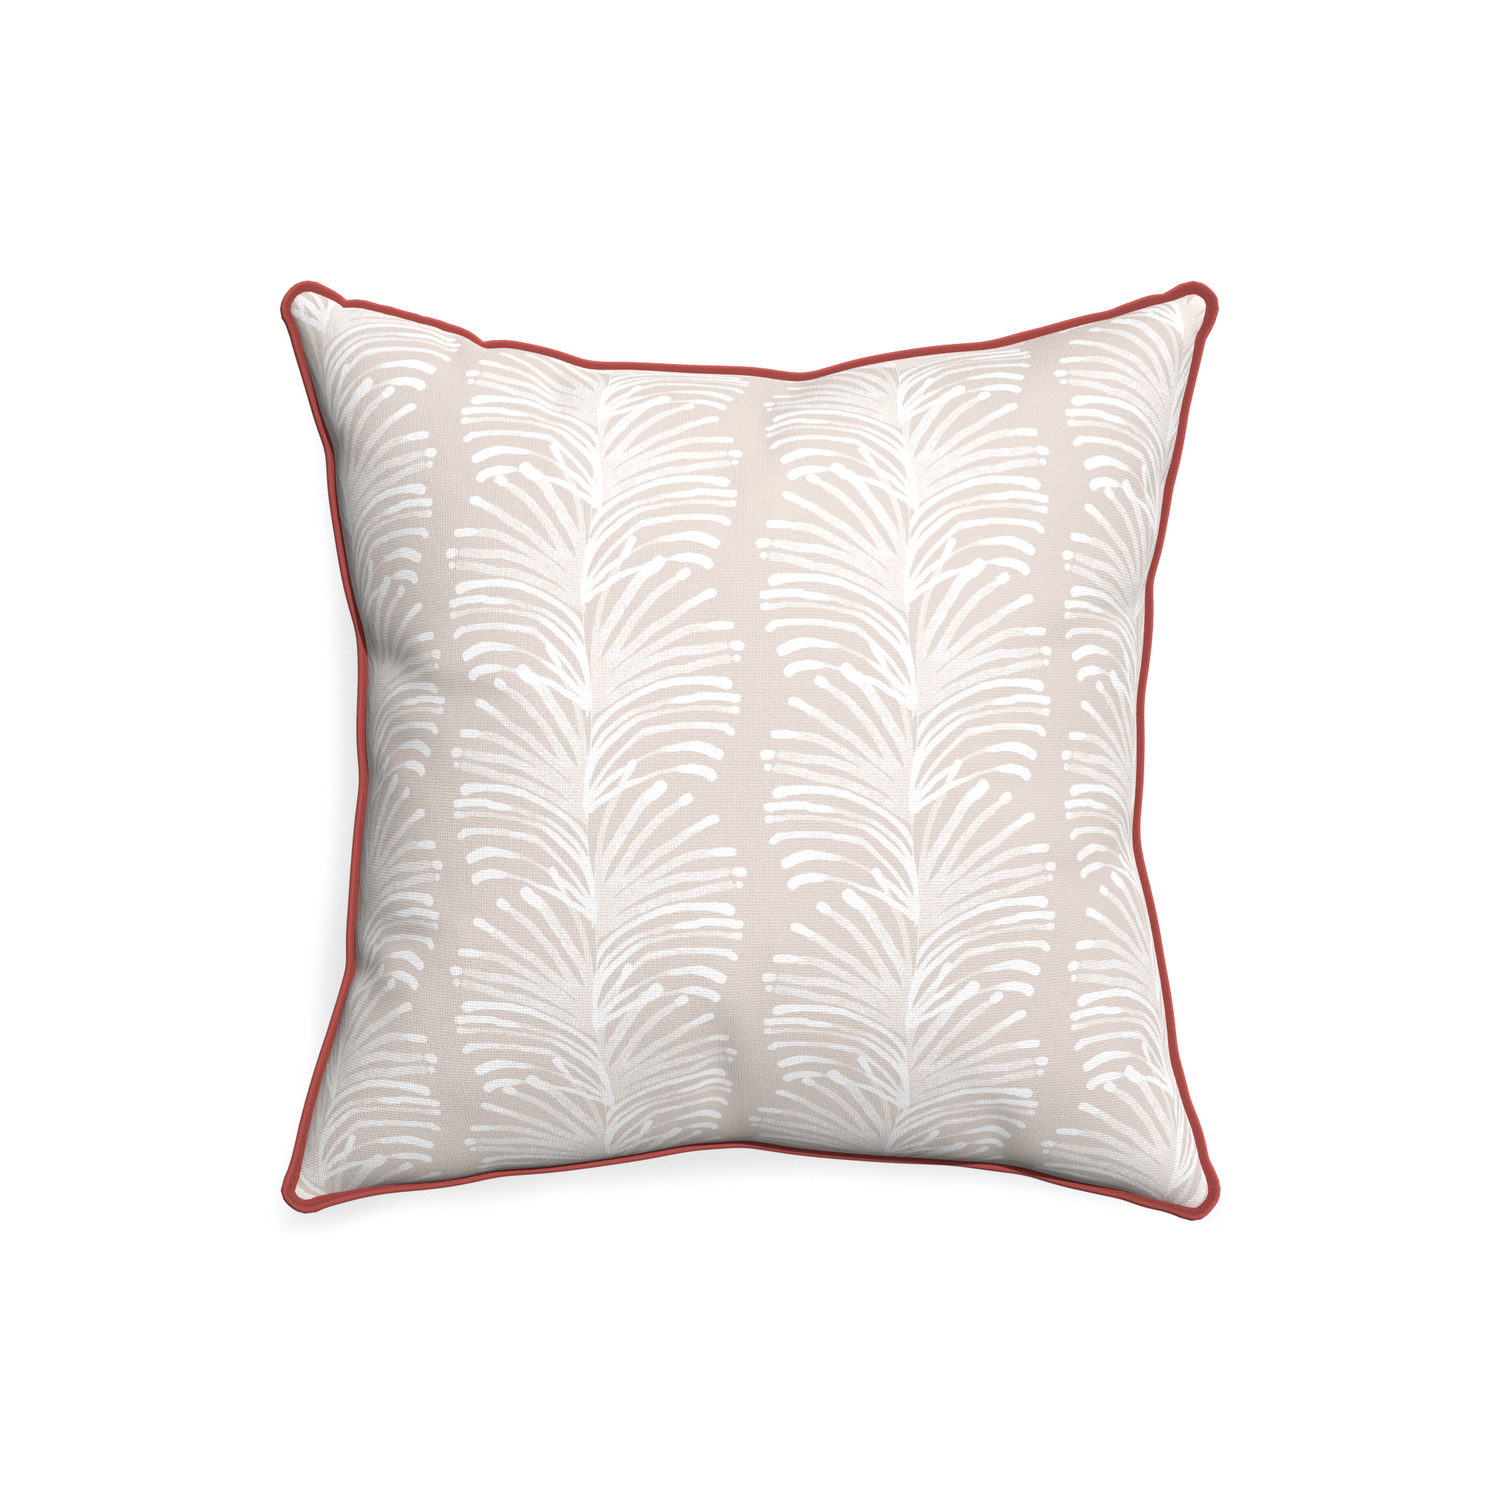 20-square emma sand custom sand colored botanical stripepillow with c piping on white background